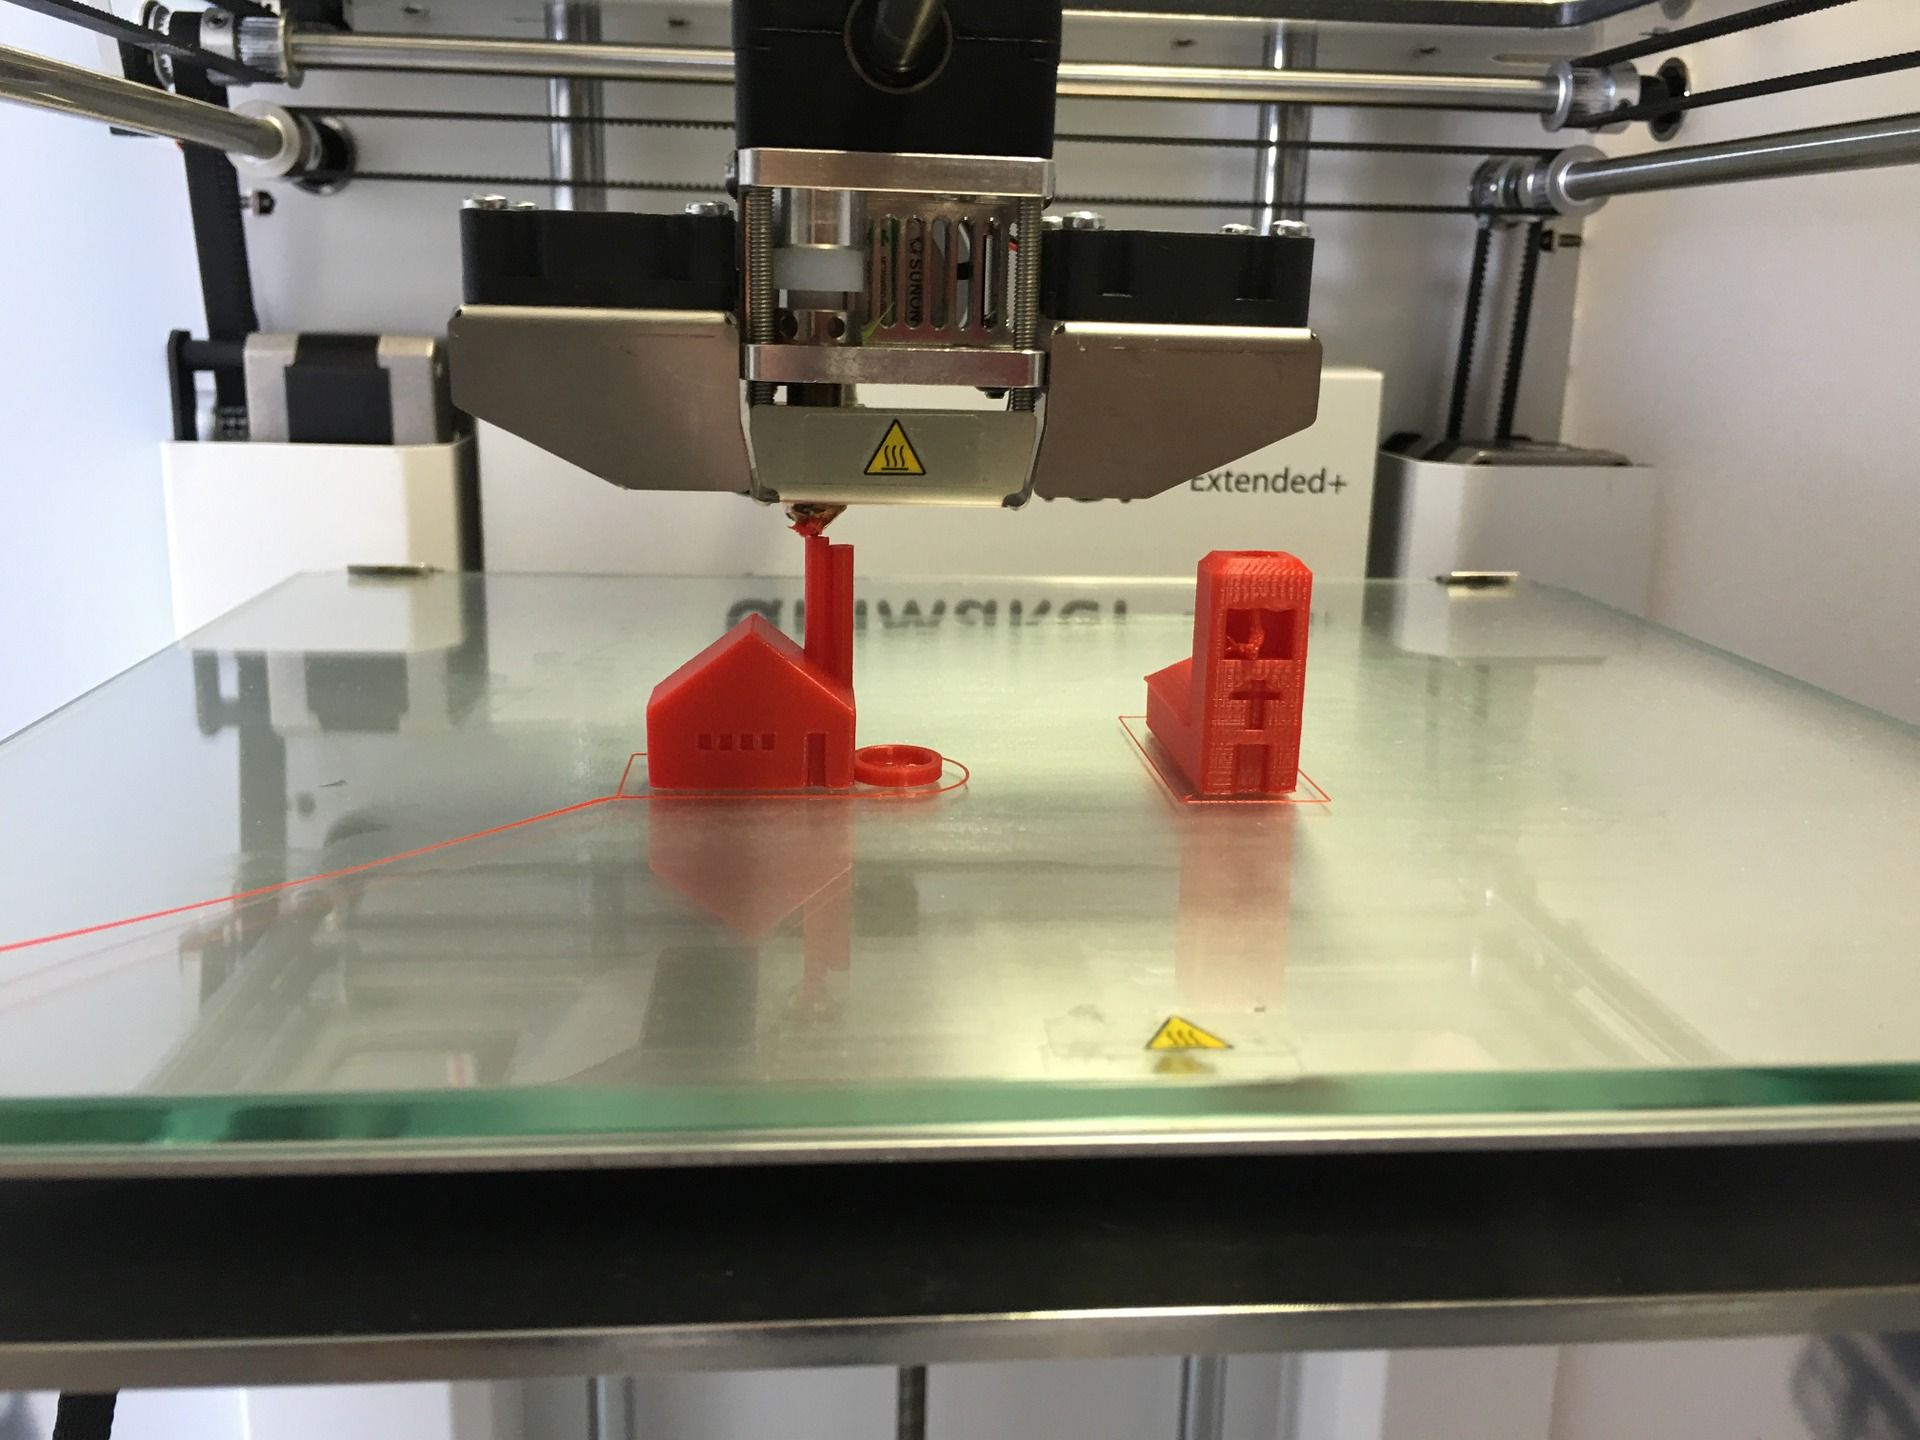 What to Do with a 3D Printer